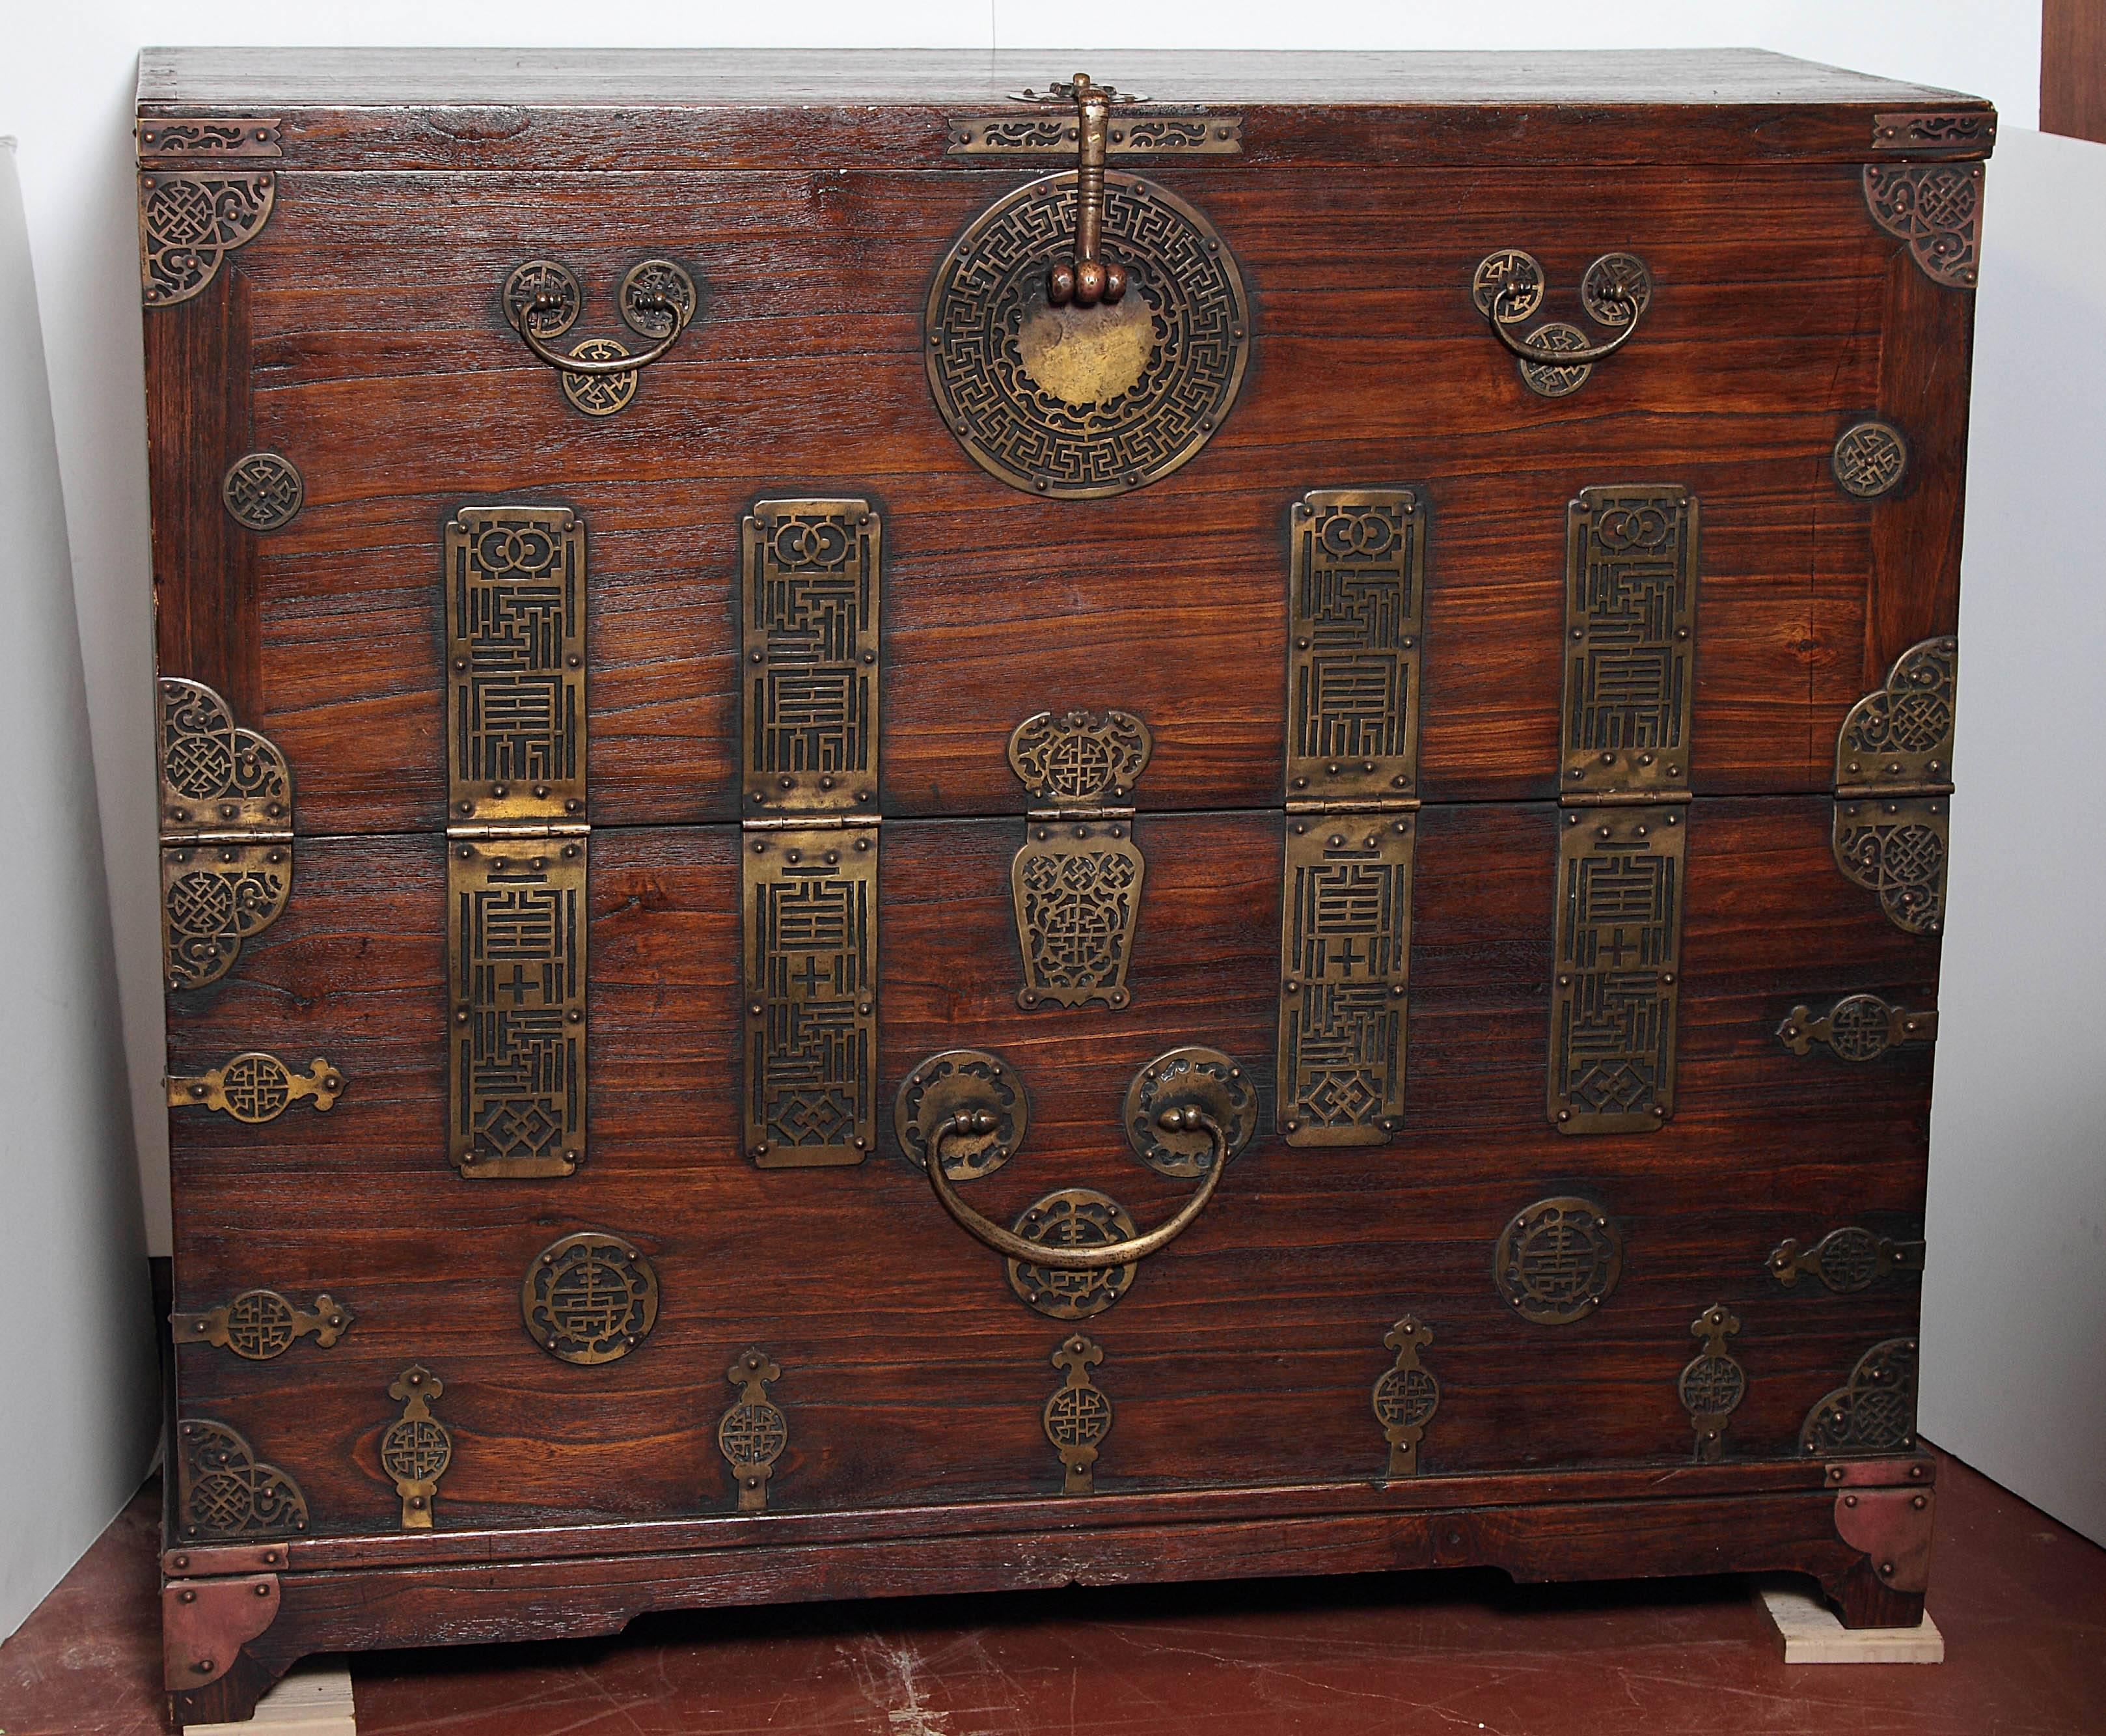 Early 20th century Korean chest, now retro-fitted for a television.